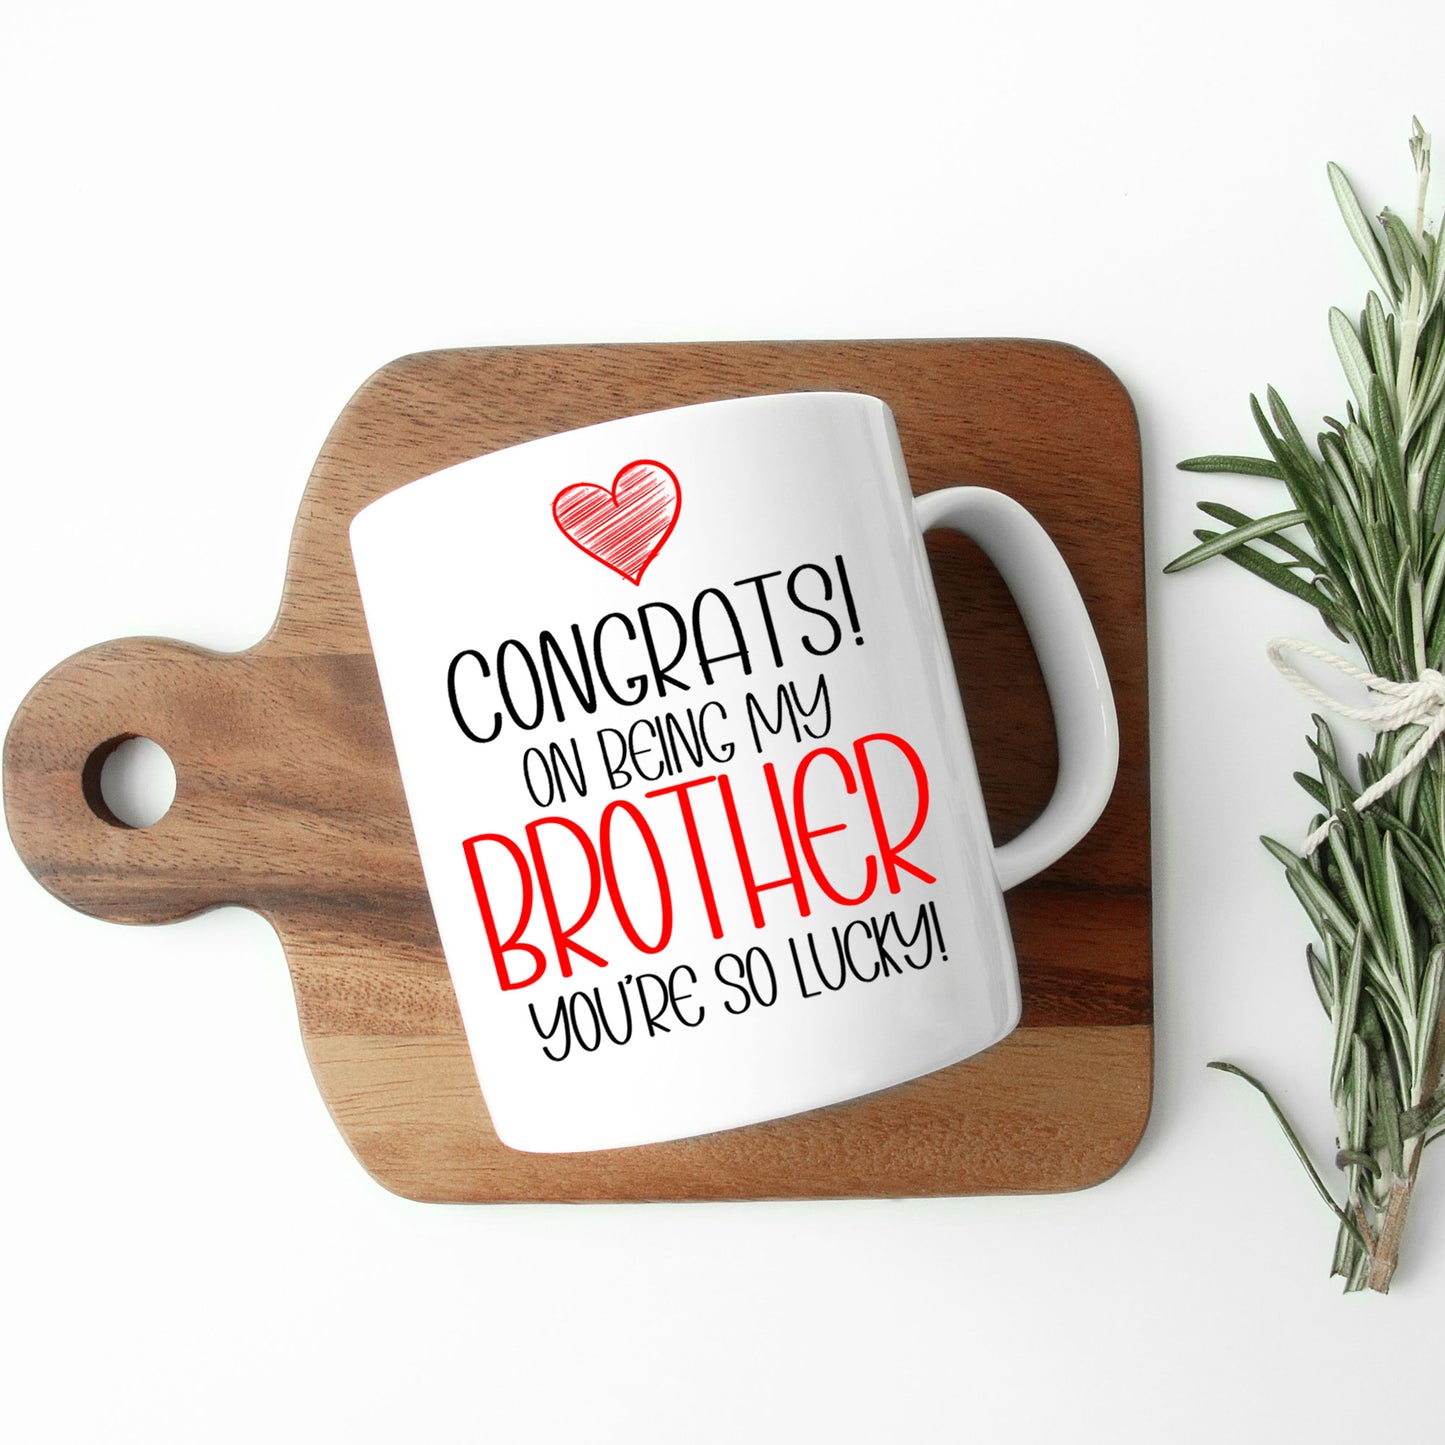 Congrats On Being My Brother Mug and/or Coaster Gift  - Always Looking Good -   